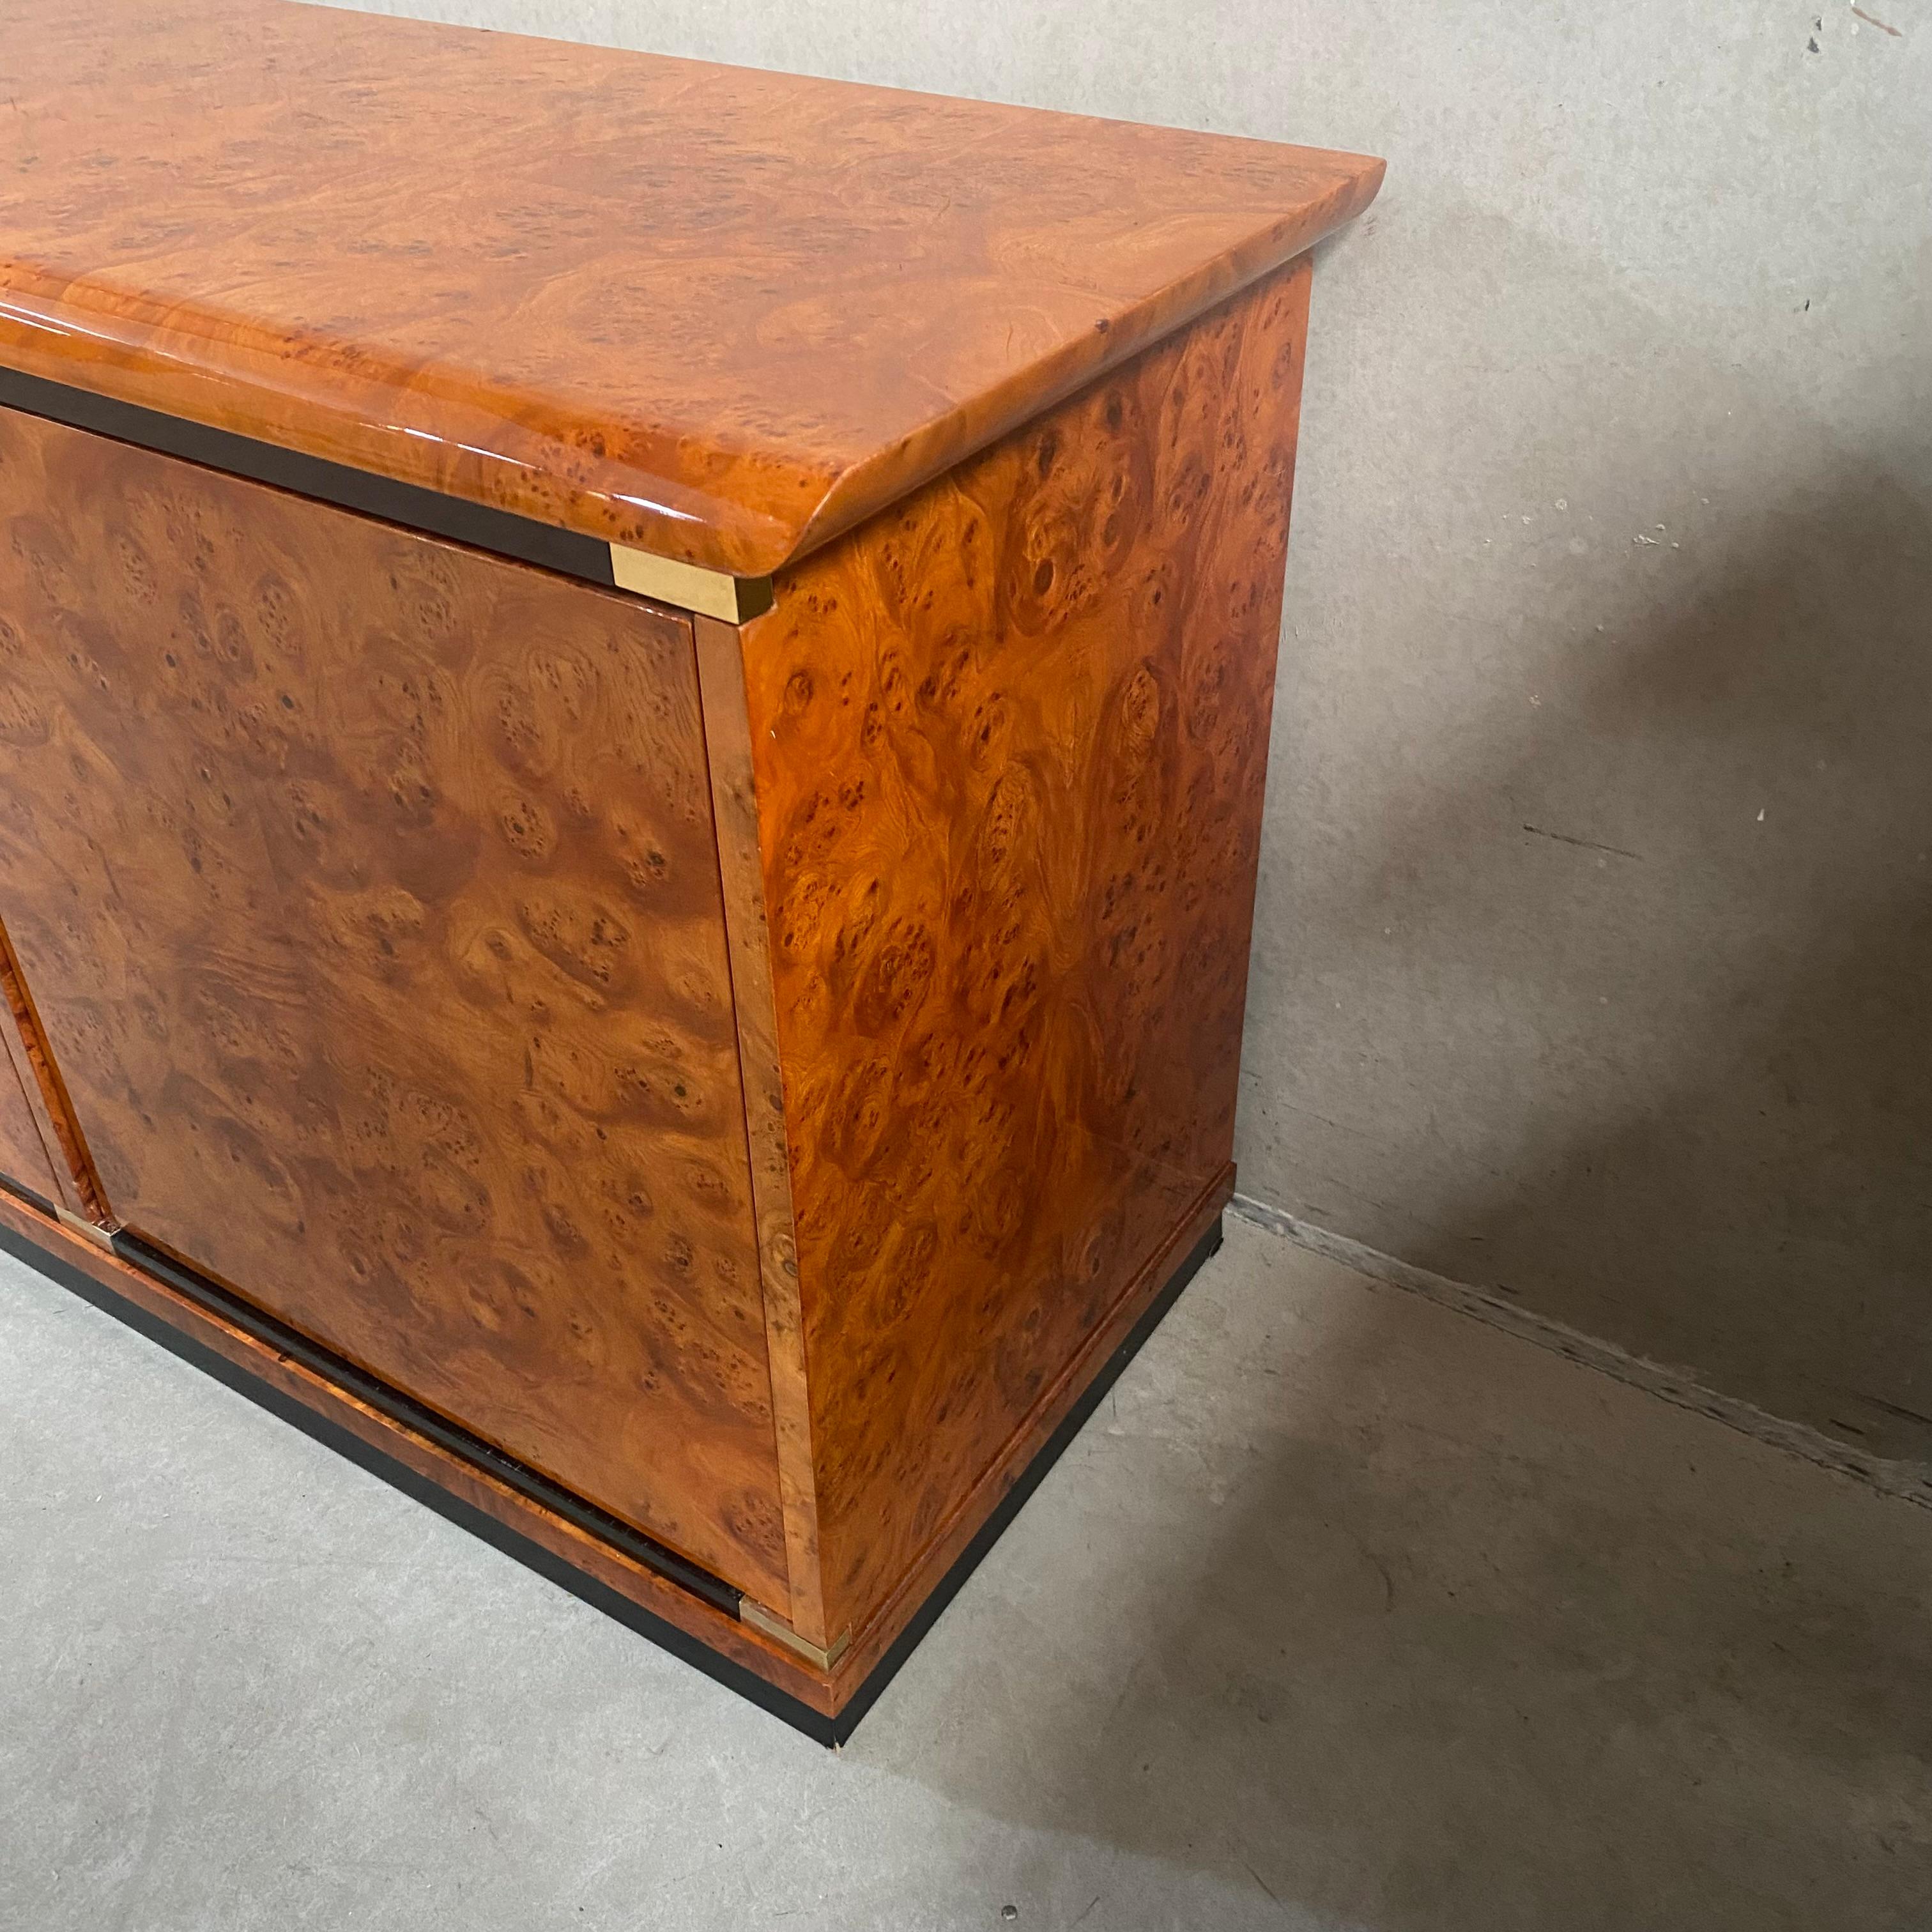 Briar Burl Wood Sideboard by Guerini Emilio for Gdm 24 Kt Gold Plated Italy 1980 For Sale 3